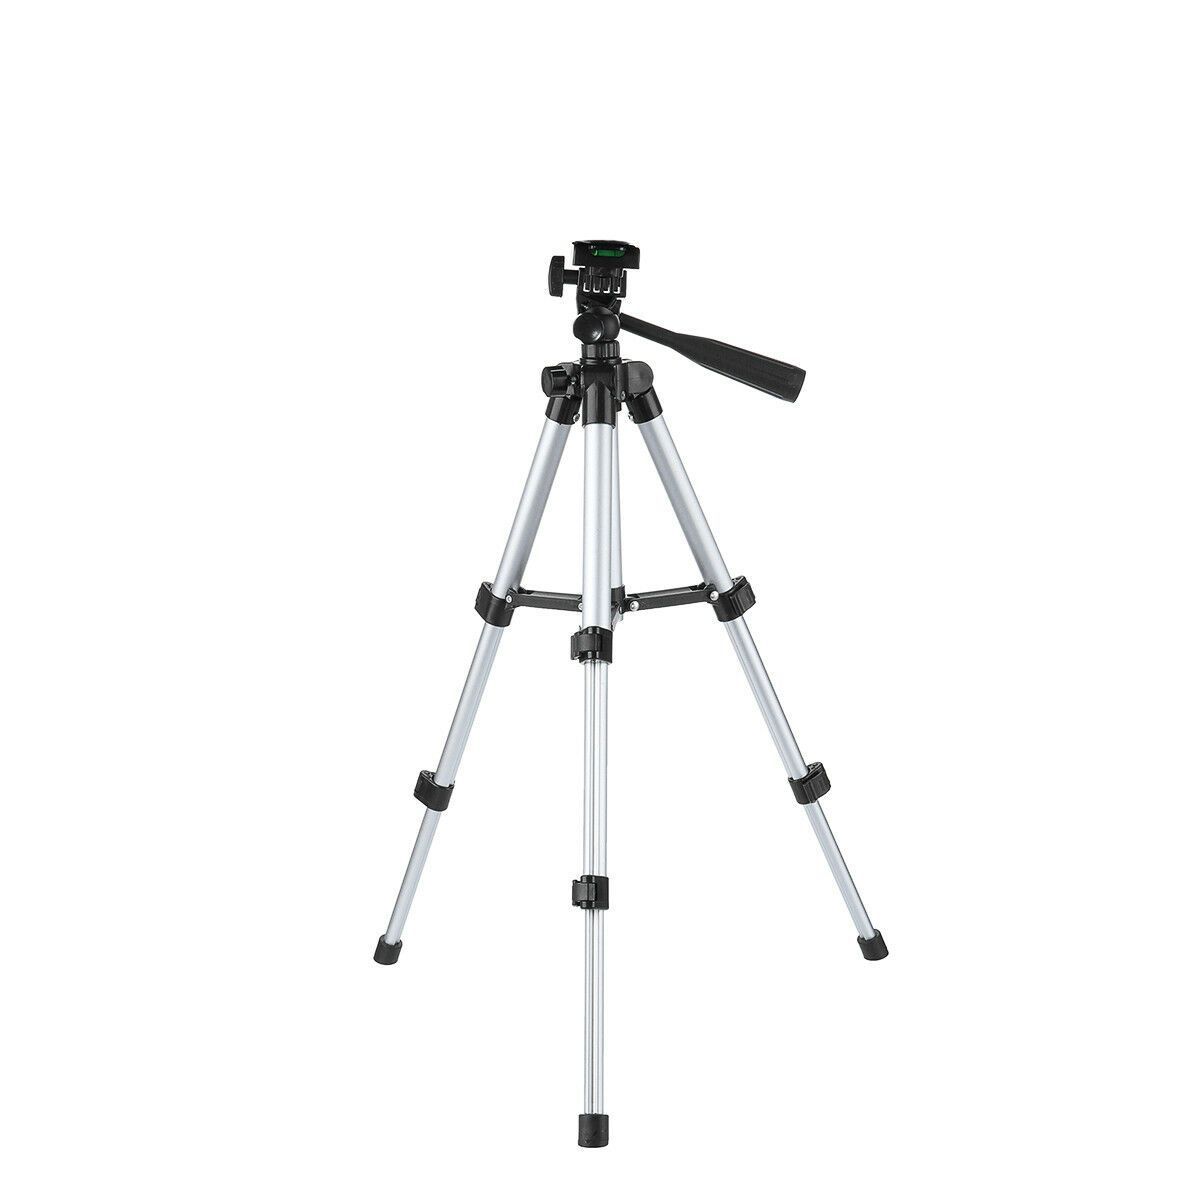 Universal Projector Tripod Stand